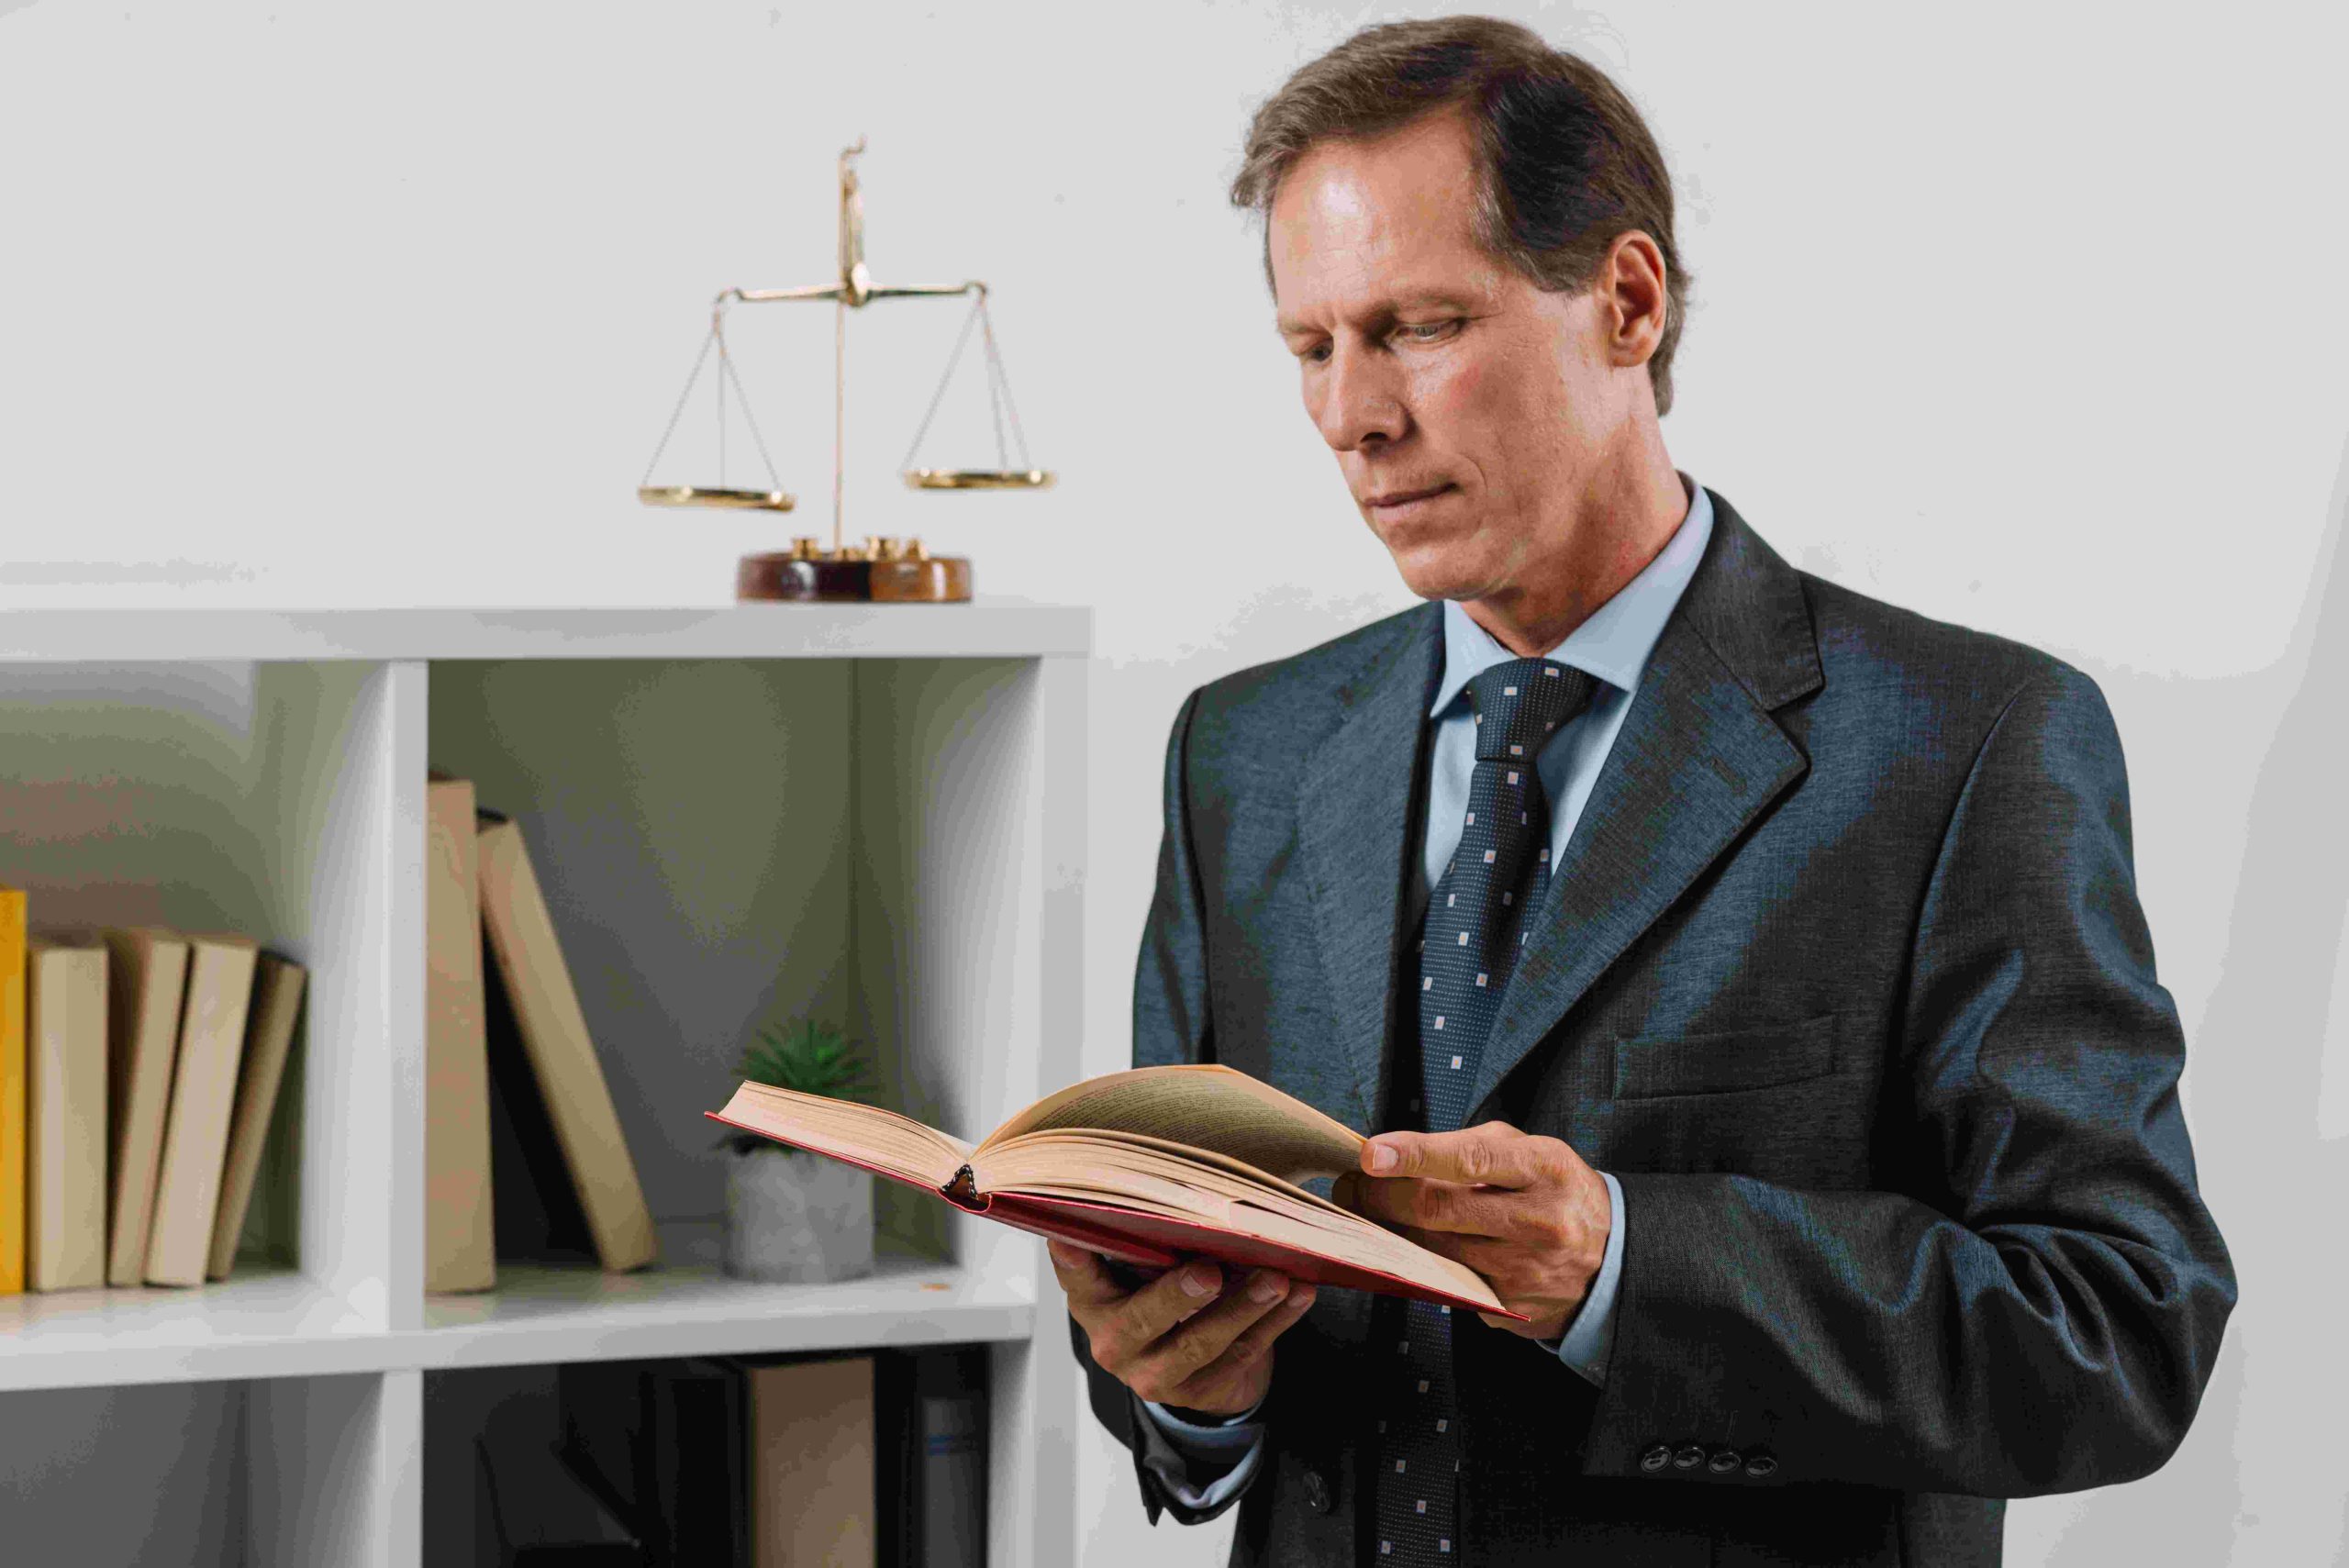 Image by <a href="https://www.freepik.com/free-photo/mature-male-reading-legal-book-courtroom_3134317.htm#query=expert%20law&amp;position=25&amp;from_view=keyword&amp;track=ais&amp;uuid=15526073-537a-4de0-bd7a-9a8b5c3429df">Freepik</a>